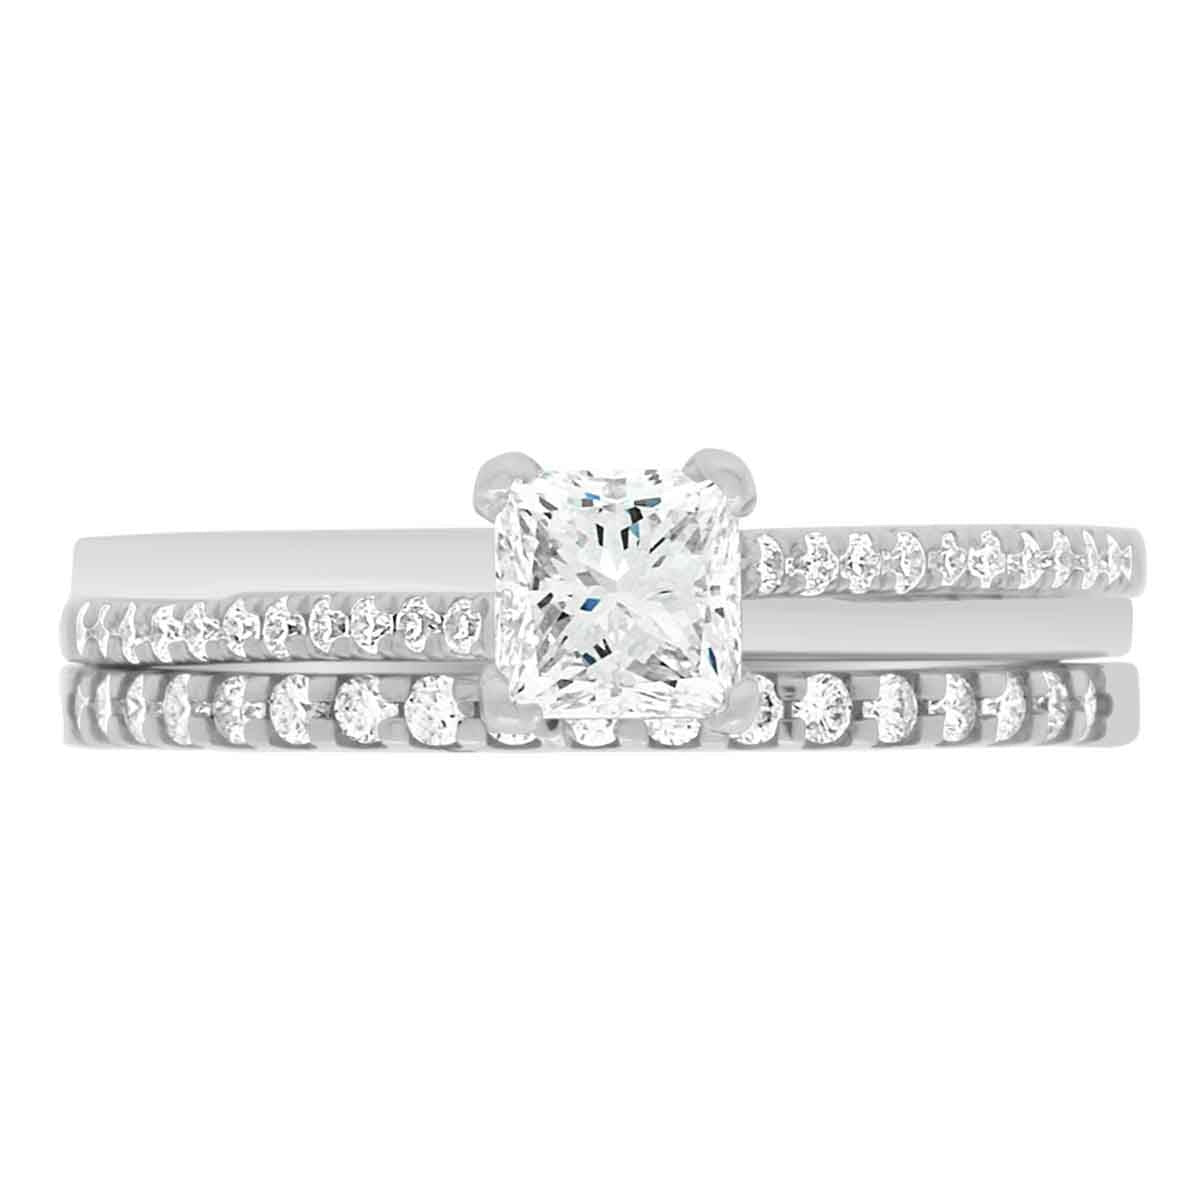 Promise Ring Style made from platinum and pictured with a diamond set wedding ring